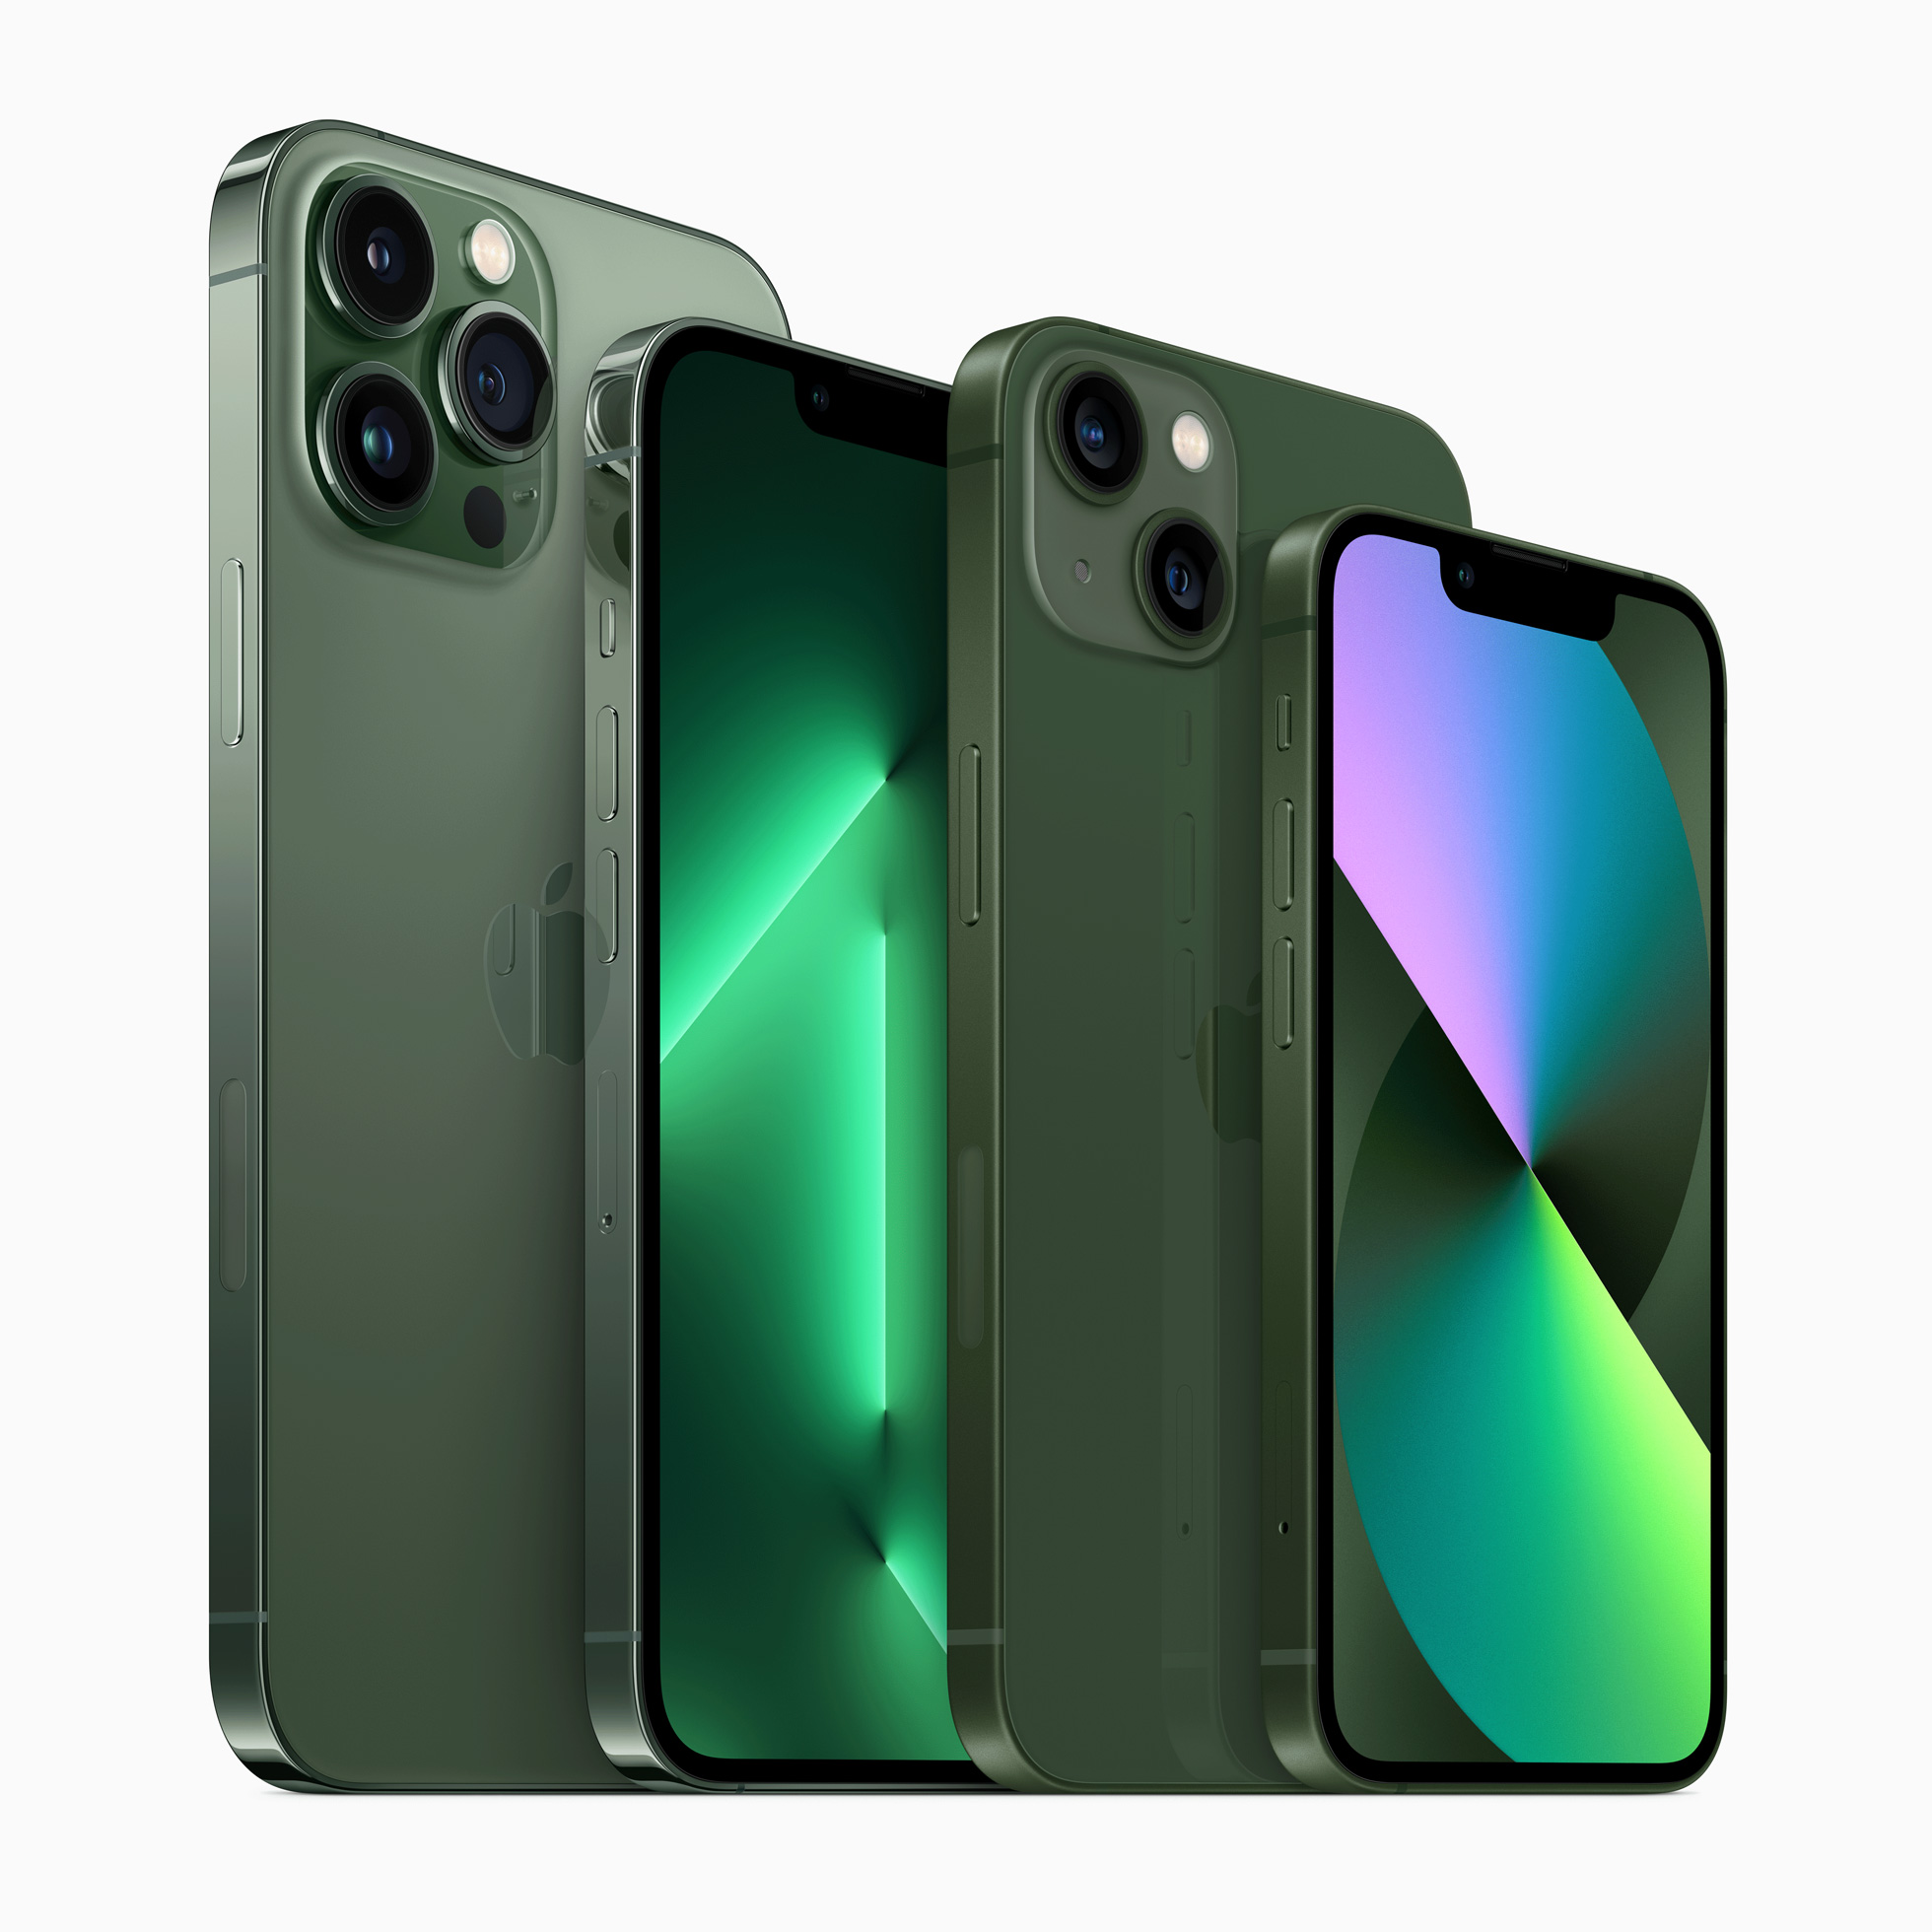 Green iPhone 13 and alpine green iPhone 13 Pro